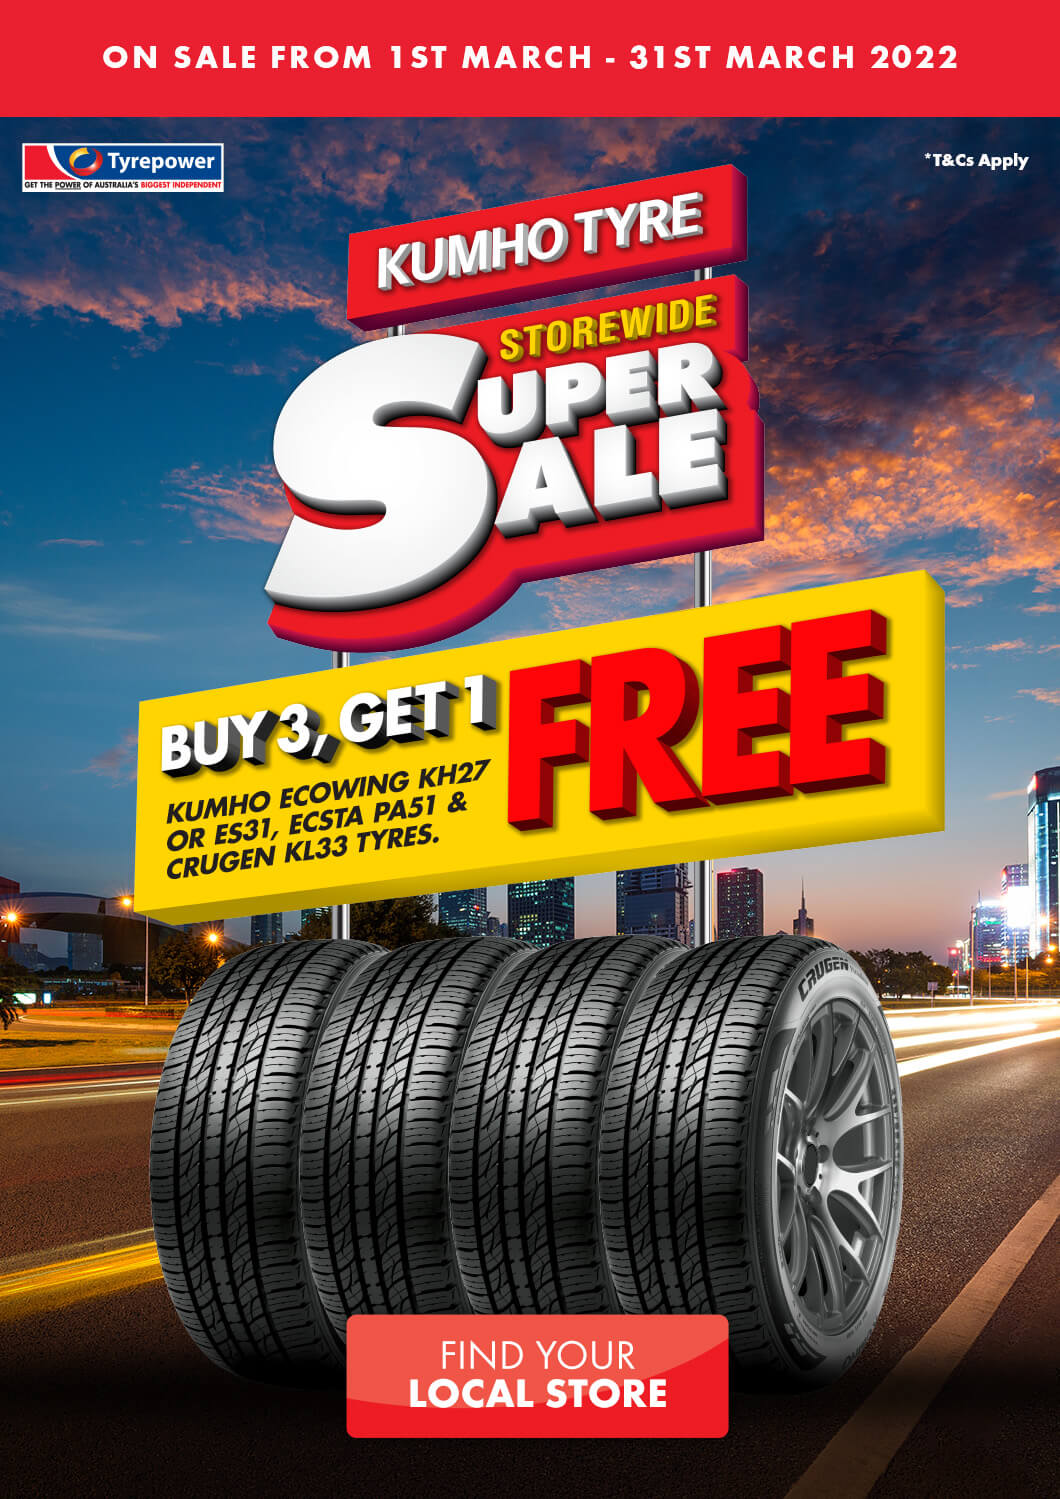 Buy 3 Get 1 Free on Kumho Ecowing KH27, Ecsta PA51, Crugen KL33 or ES31 Tyres.